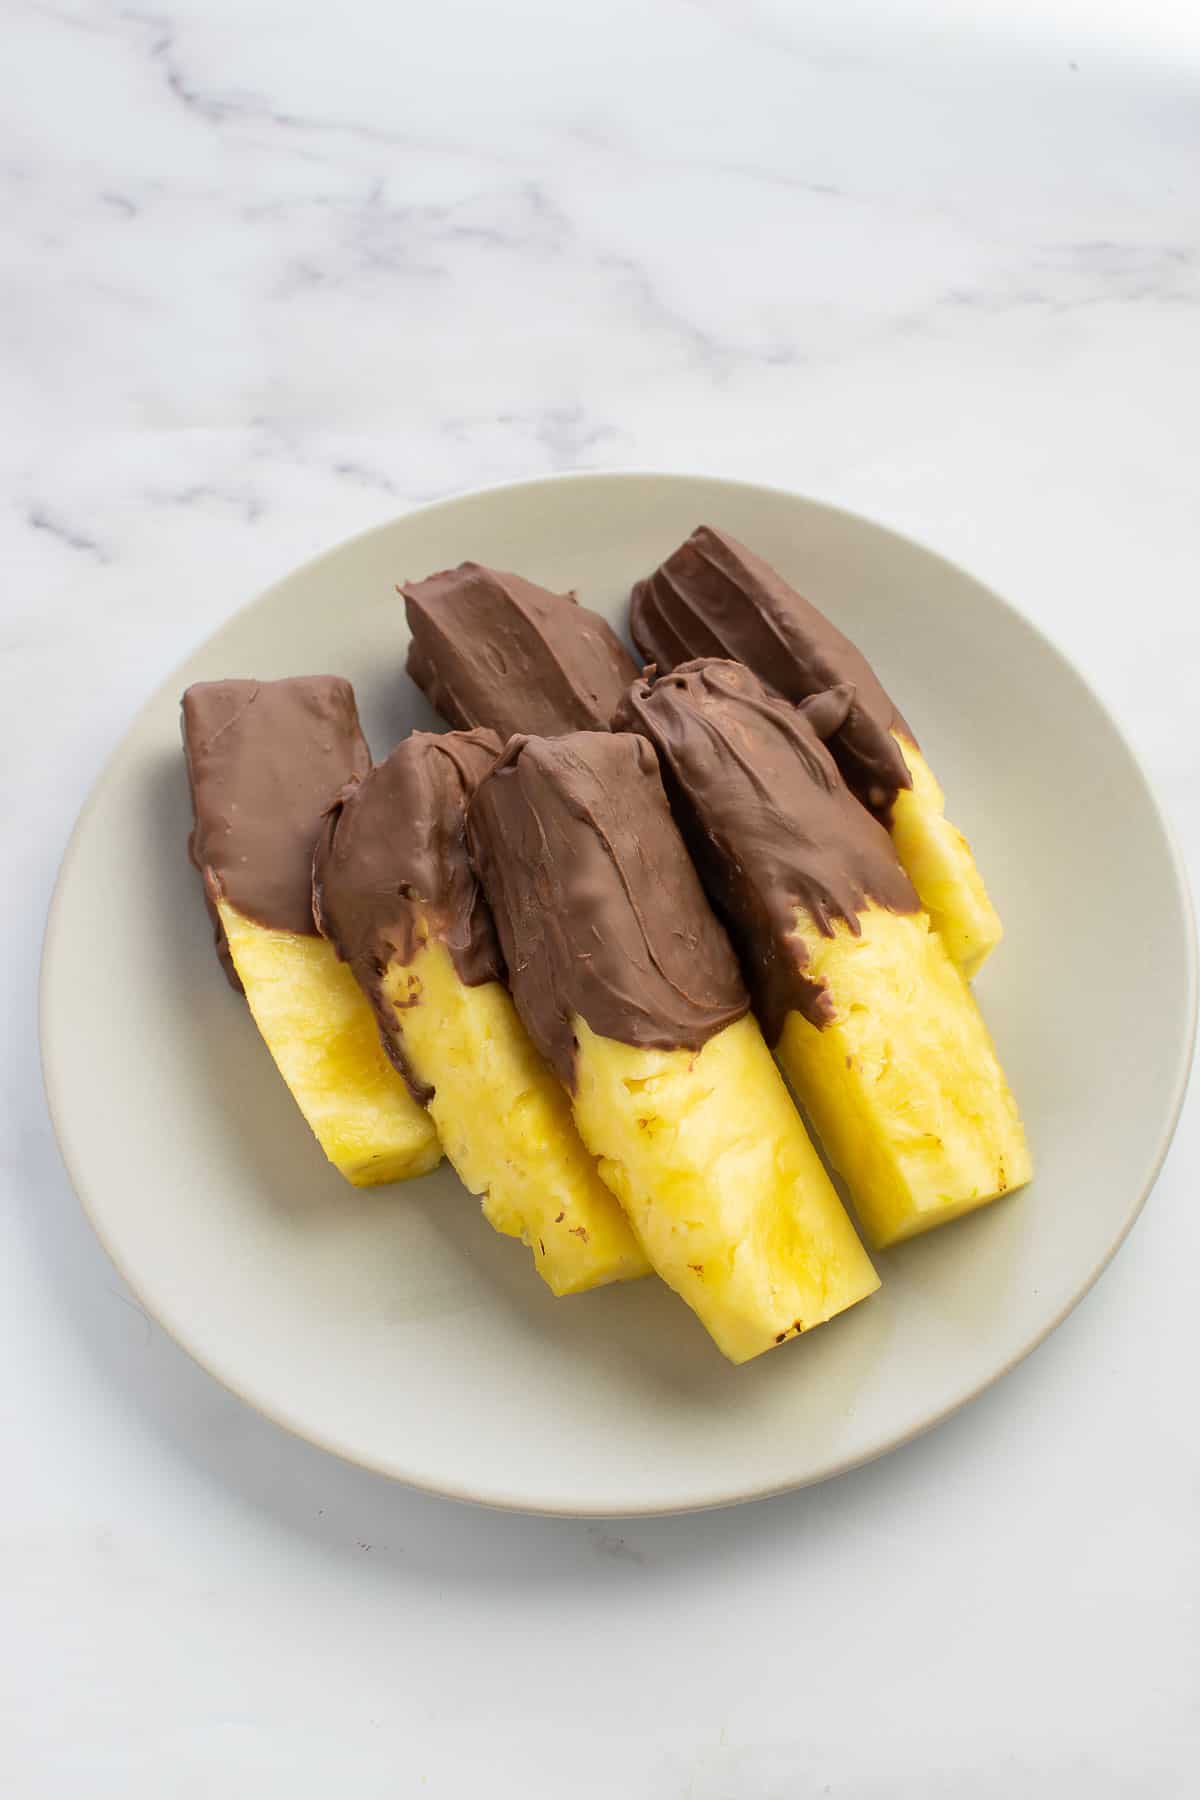 Chocolate covered pineapple sticks on a plate.